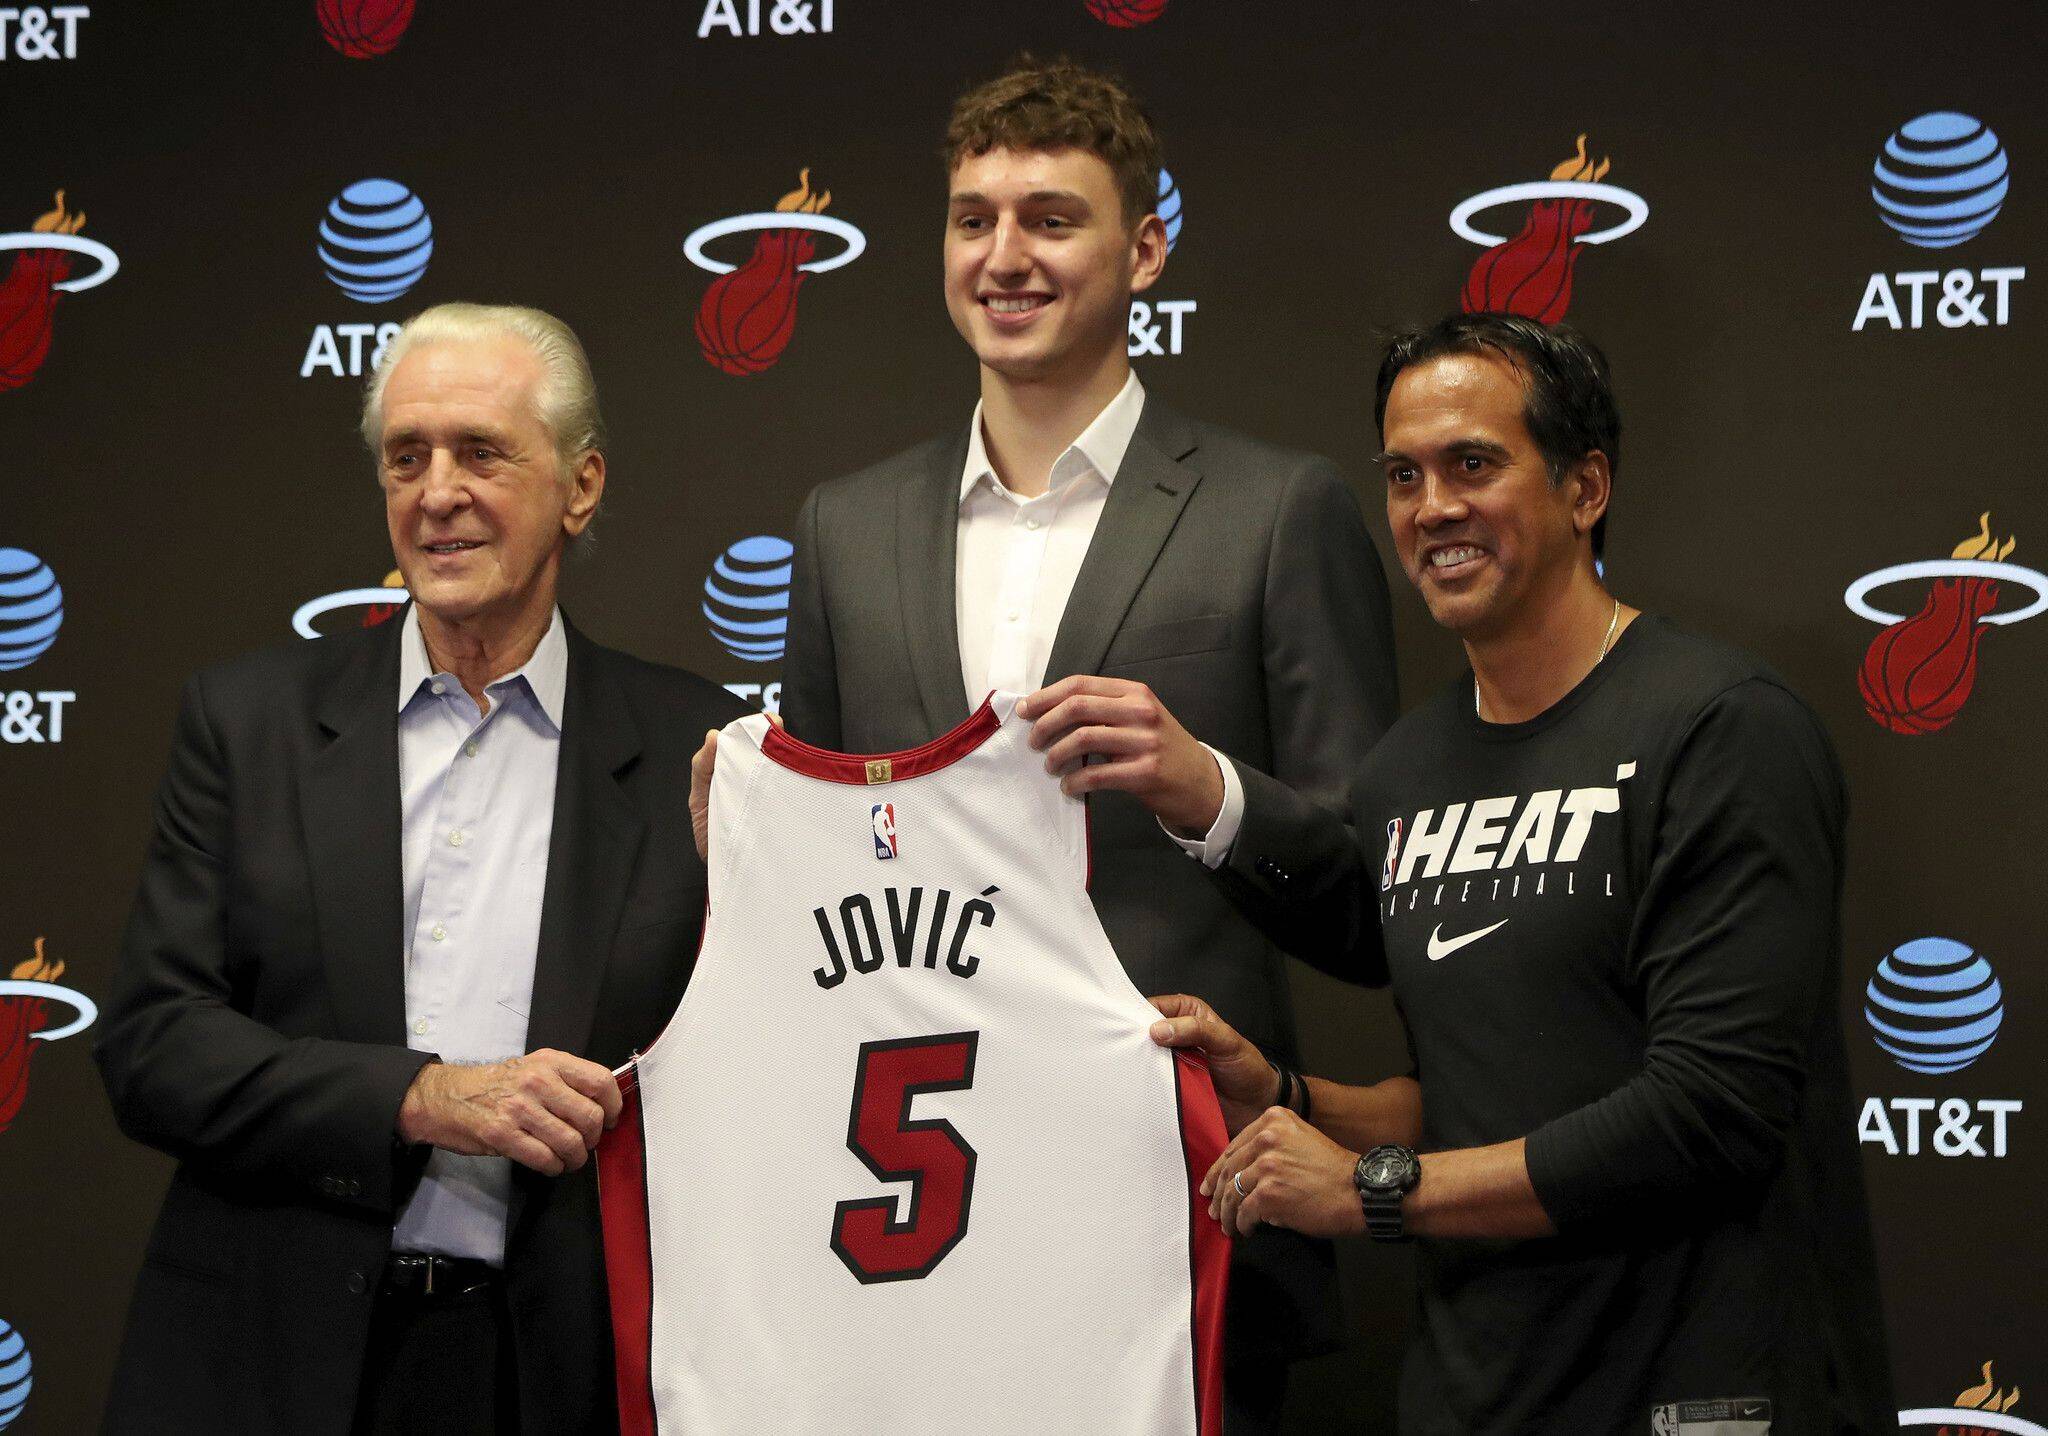 Sport Bilder des Tages June 28, 2022: Miami Heat President Pat Riley, new draft pick Nikola Jovic and Head Coach Erik Spoelstra show off Jovic s new team jersey on Monday June 27, 2022 during a press conference, PK, Pressekonferenz at FTX Arena in Miami. The 19-year-old, 6-foot-11Serbian forward was drafted Thursday night at No. 27. - ZUMAm67_ 0161737955st Copyright: xSusanxStockerx/xSouthxFloridax